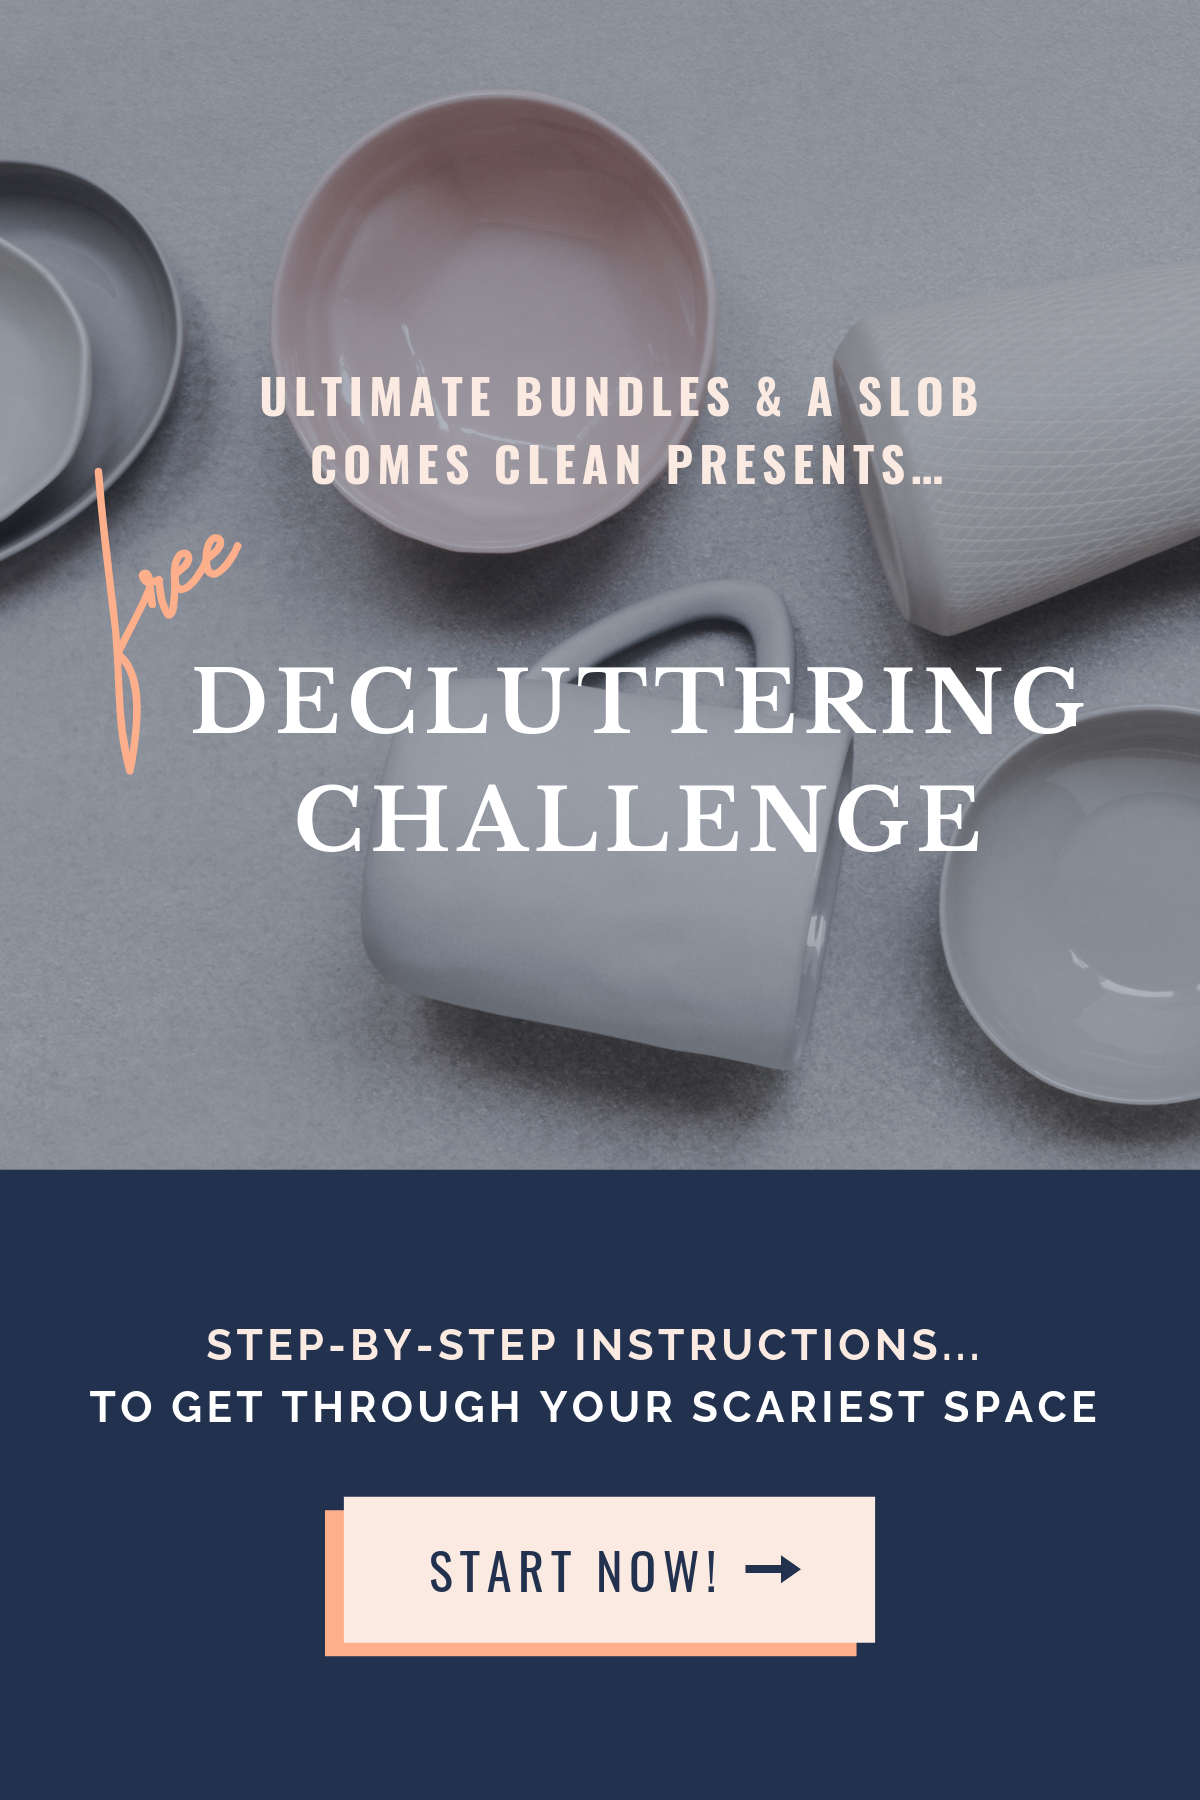 Free declutter challenge and workbook at I'm an Organizing Junkie blog